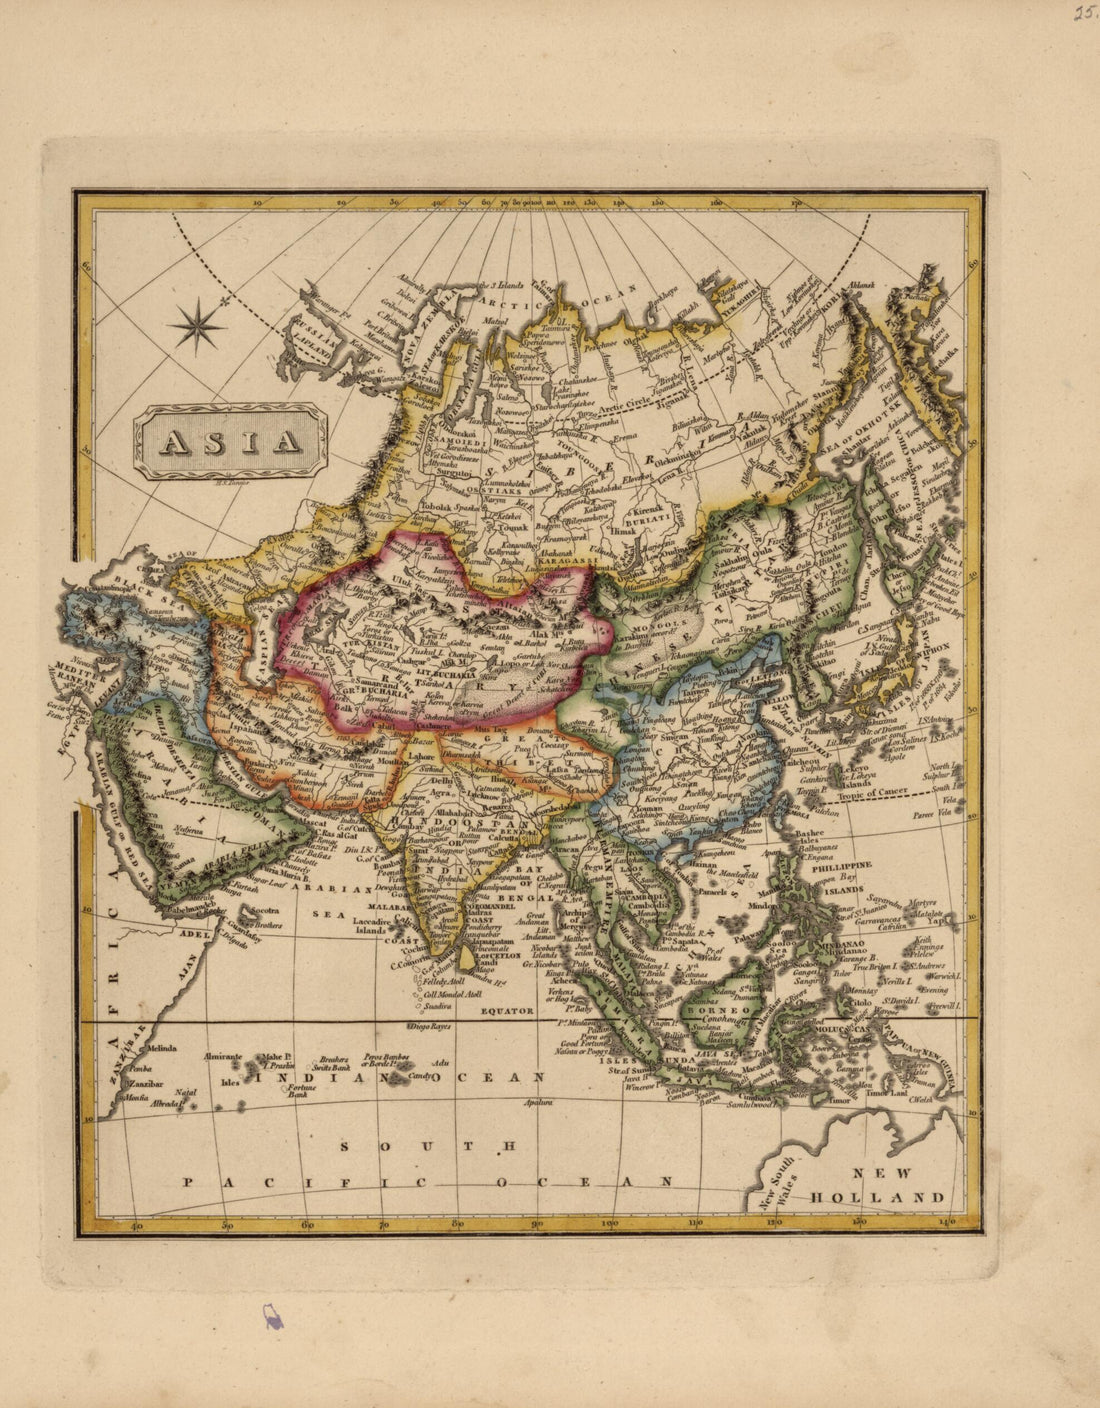 This old map of Asia from a New and Elegant General Atlas, Containing Maps of Each of the United States  from 1817 was created by Henry Schenck Tanner in 1817